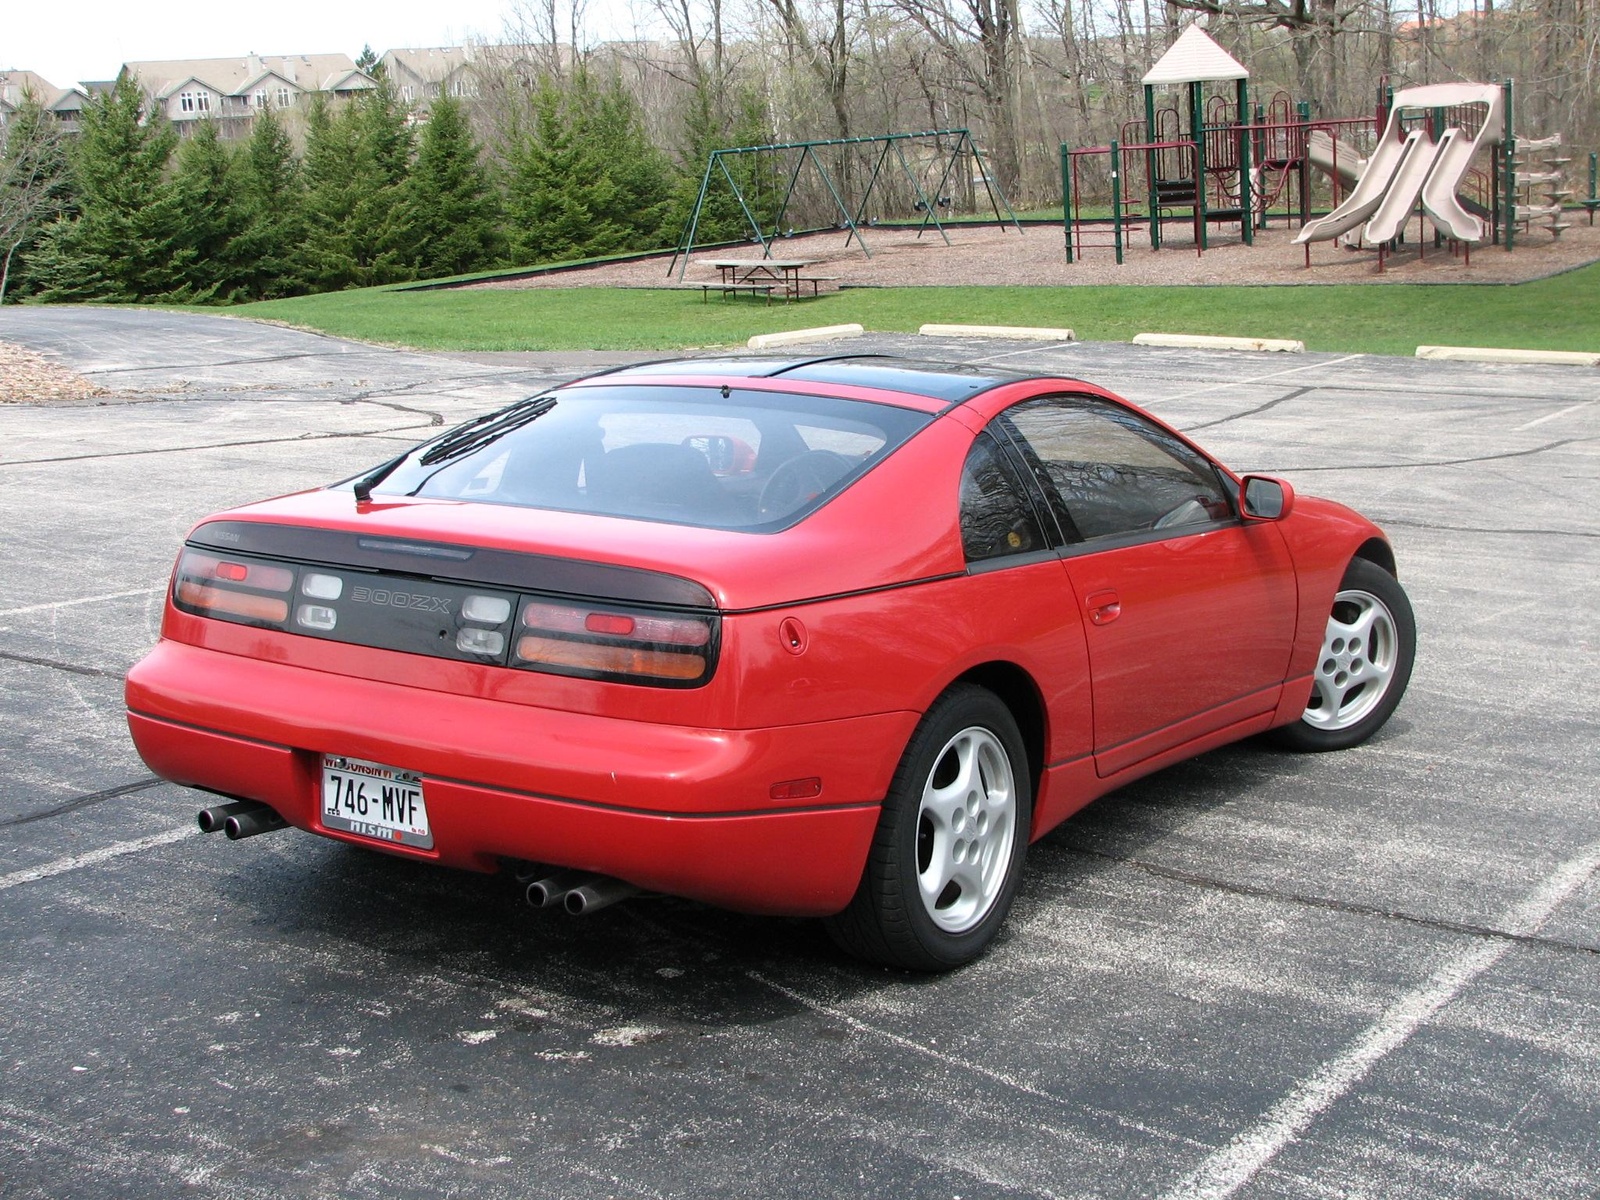 Picture of a 1990 nissan 300zx